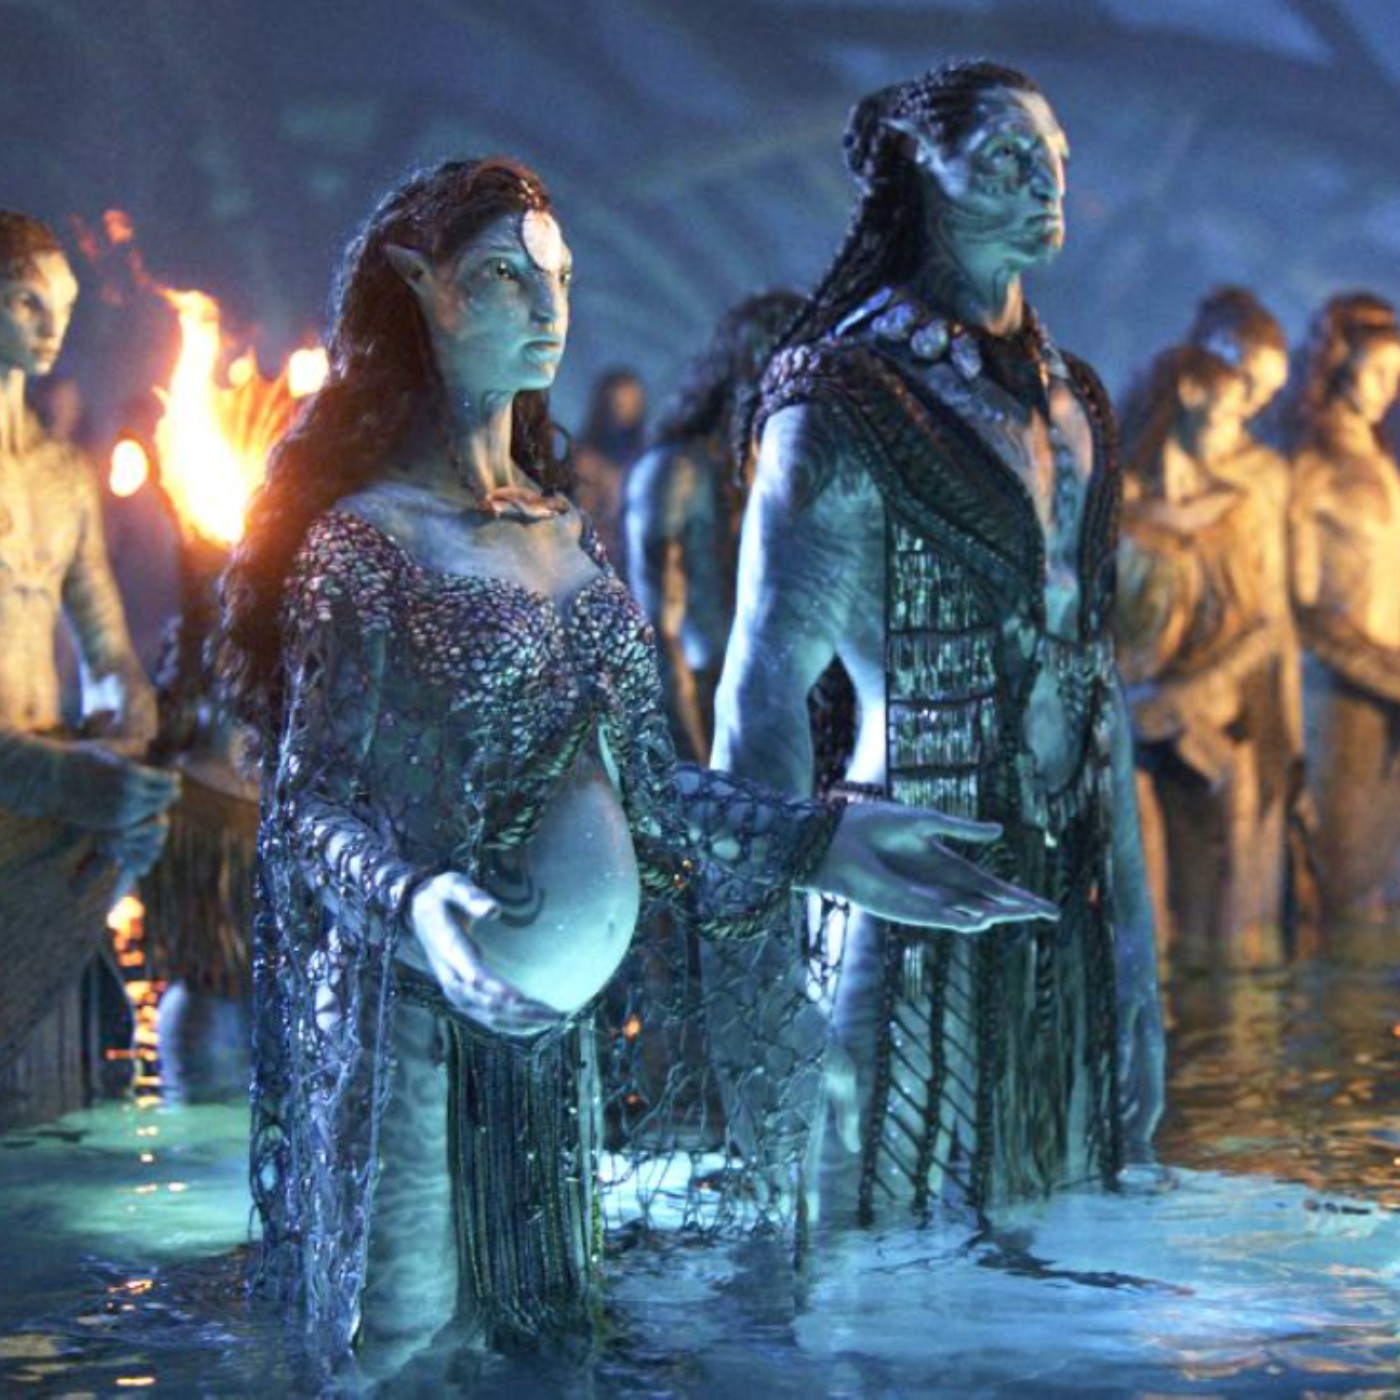 Avatar The Way Of Water Avatar 2 Available For Download On Tamilrockers  Movierulz Fimlyzilla 123movies Telegram App And Sites Heres What We  Know